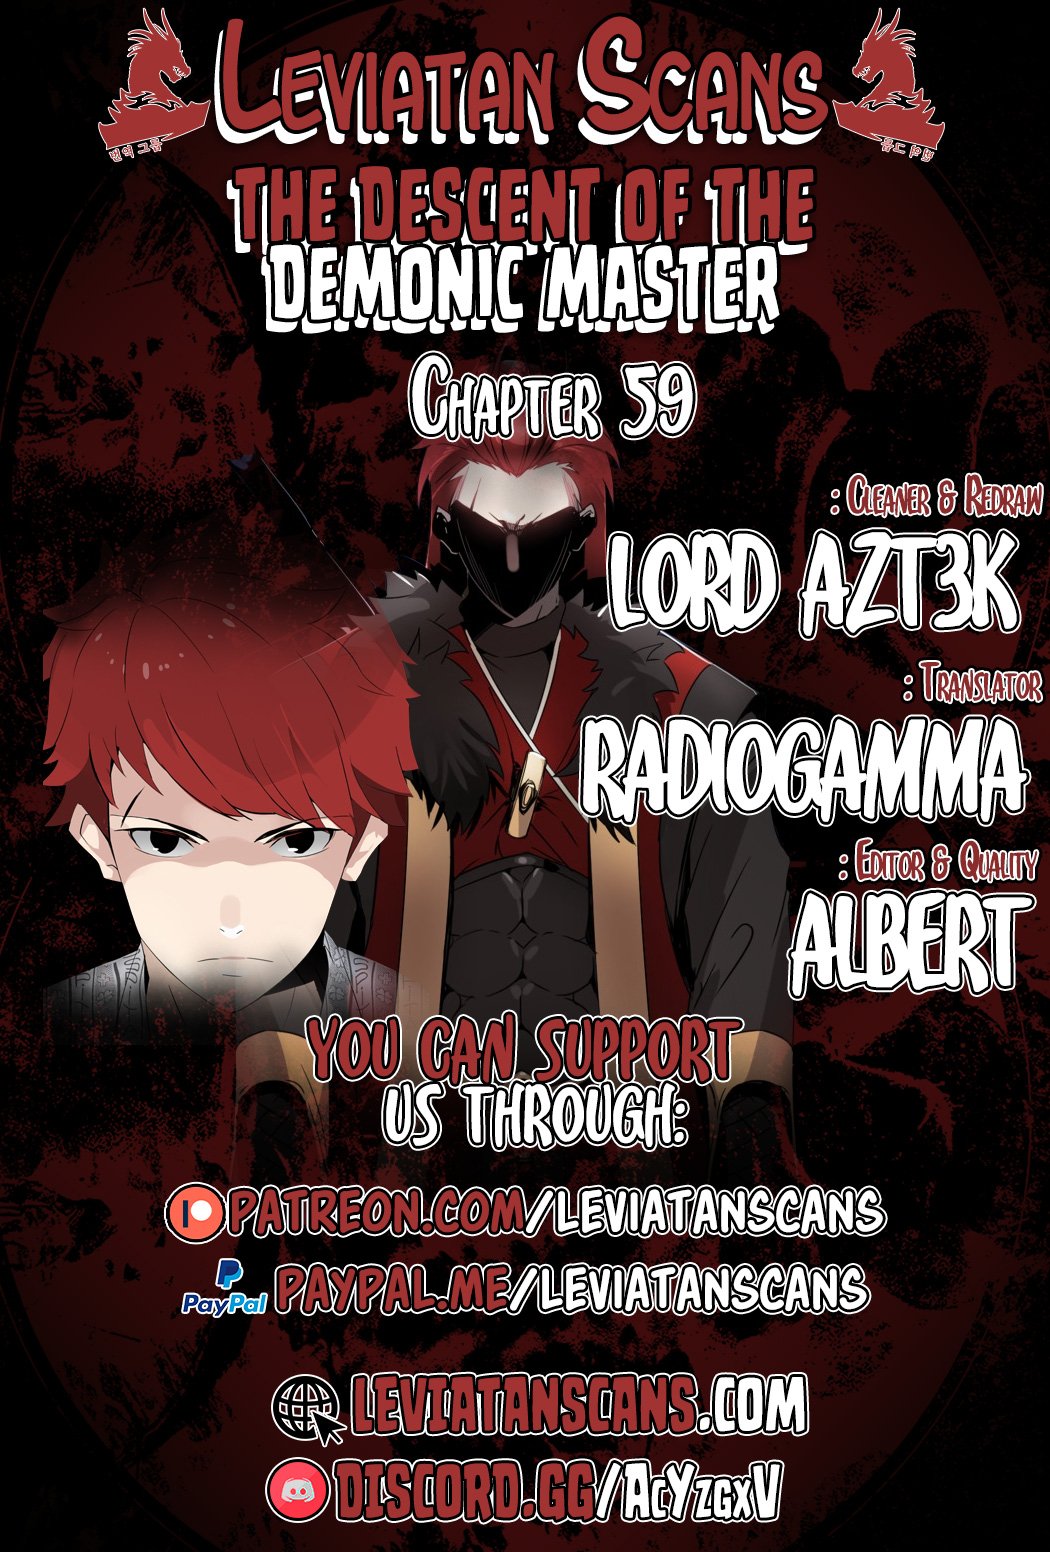 The Descent of the Demonic Master 59 01